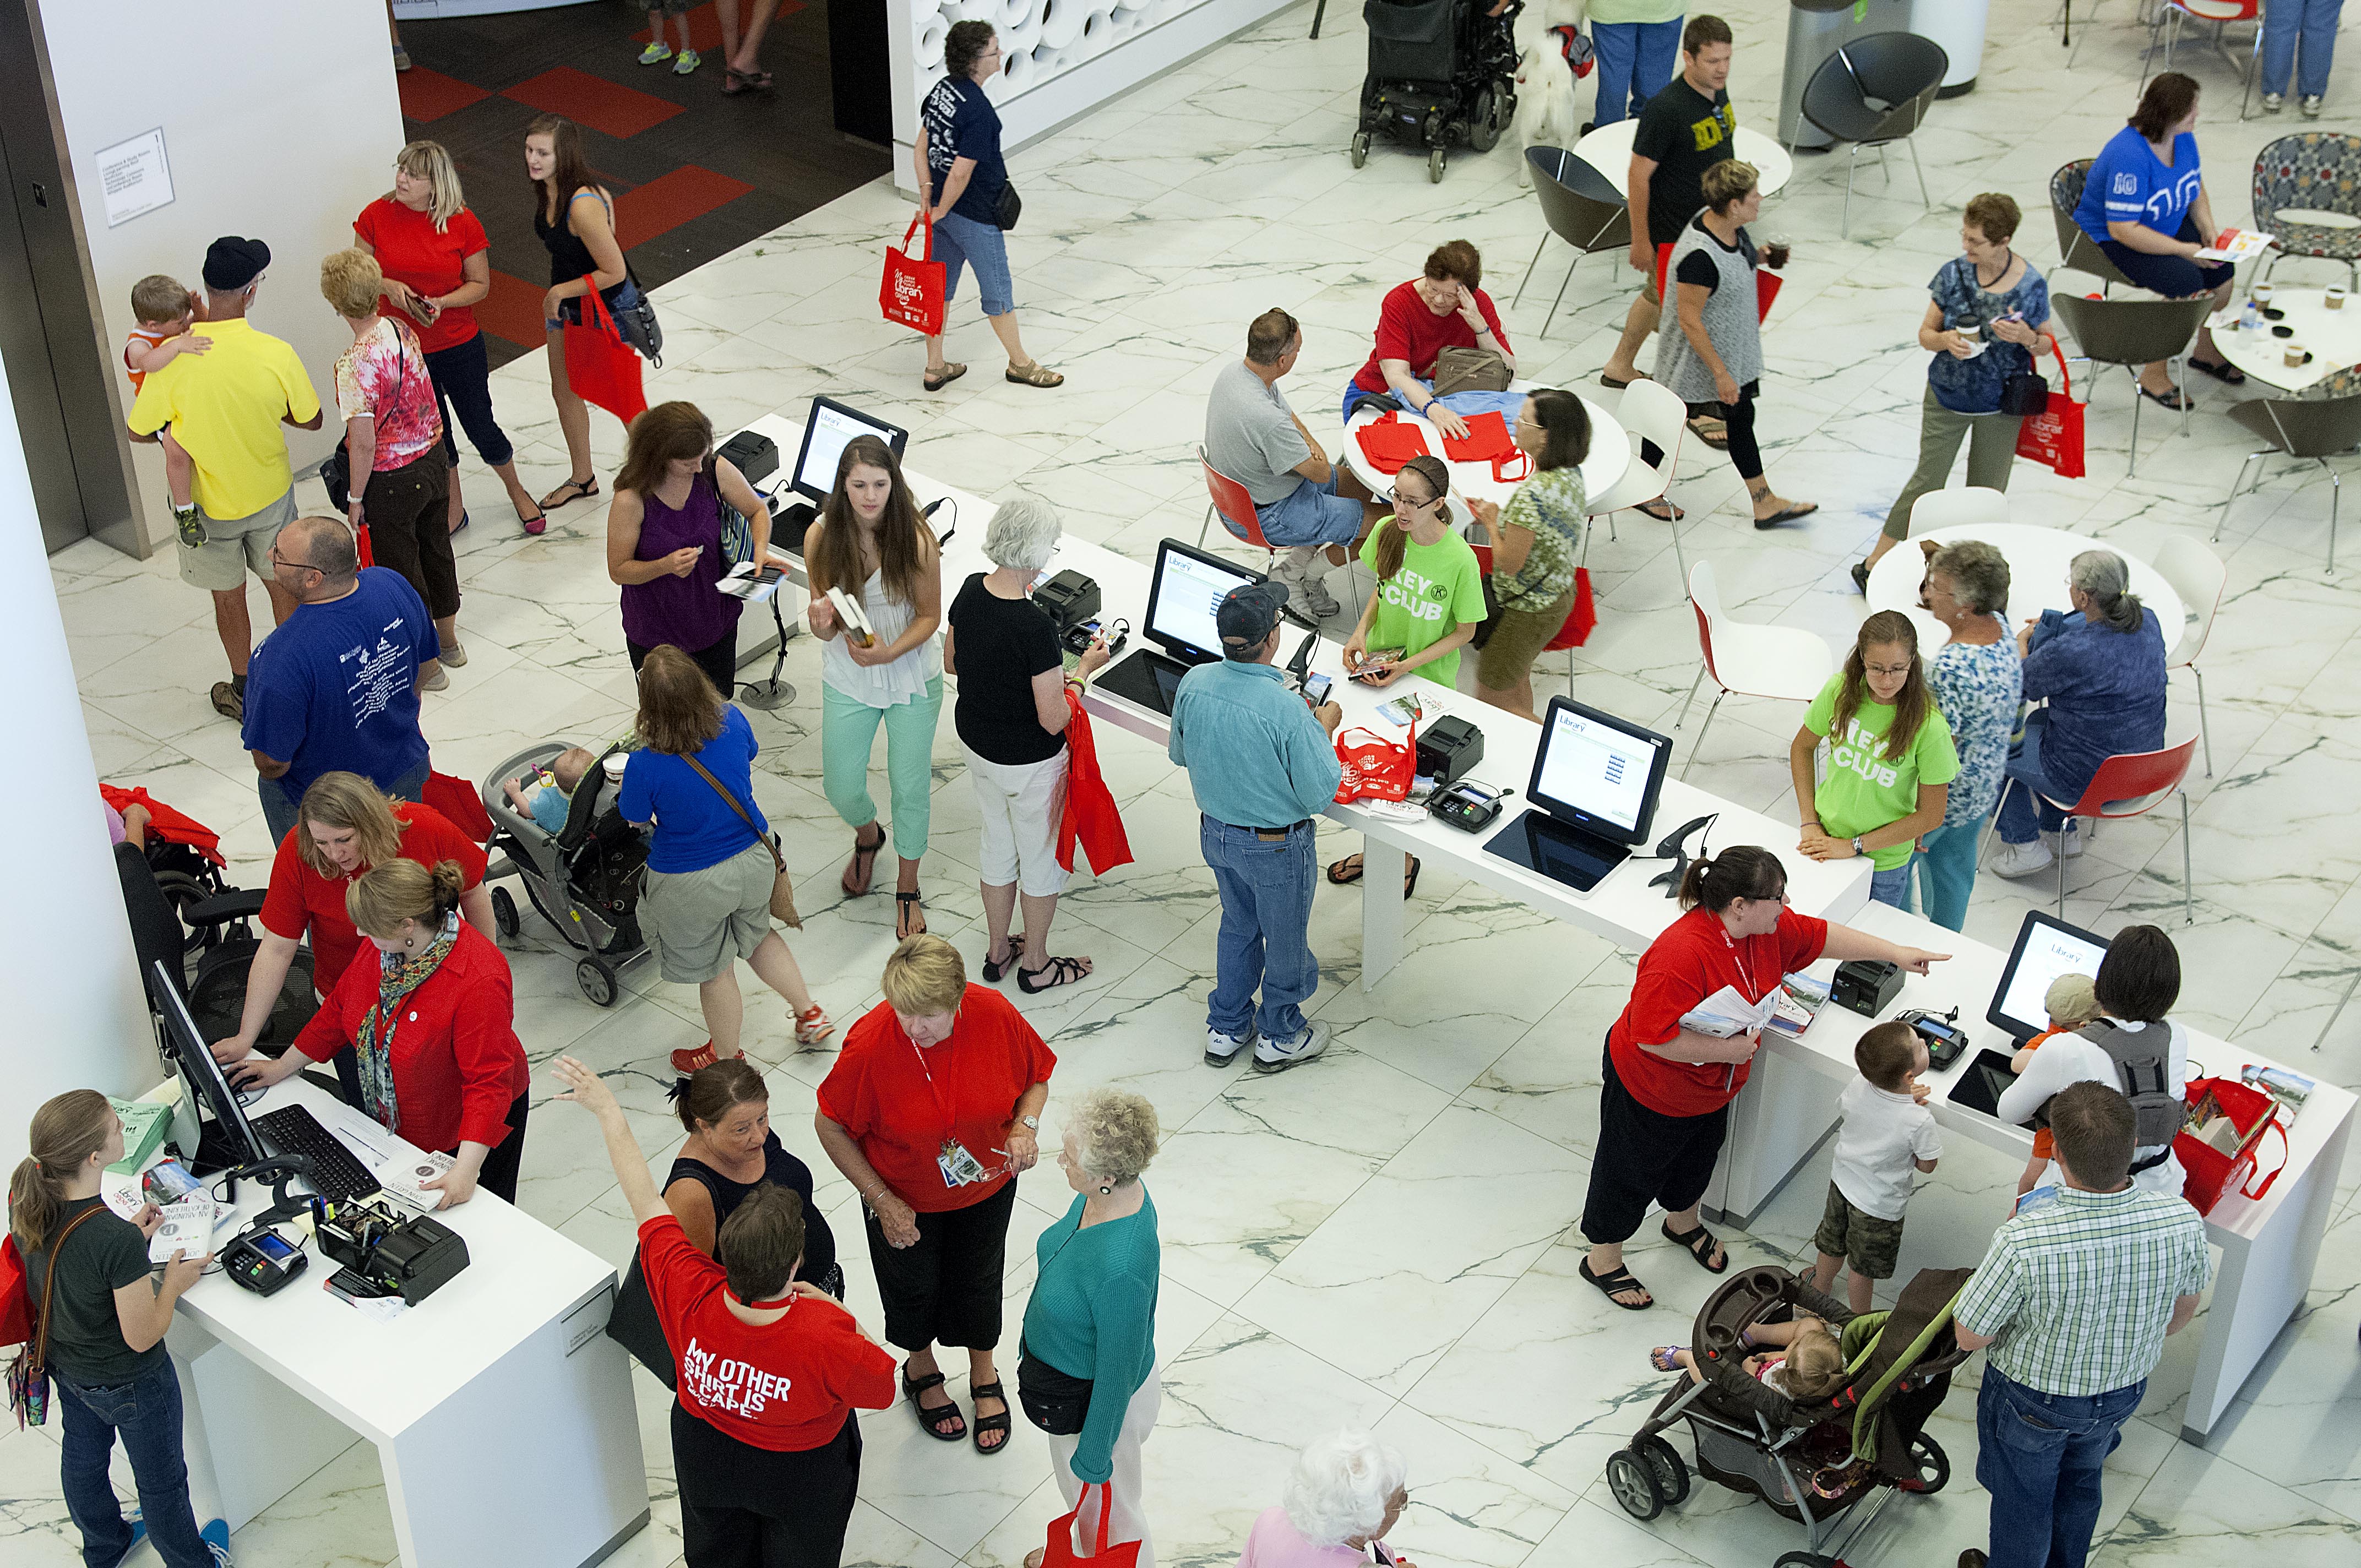 Crowds of people stand on the white floor and talk and look at computers.